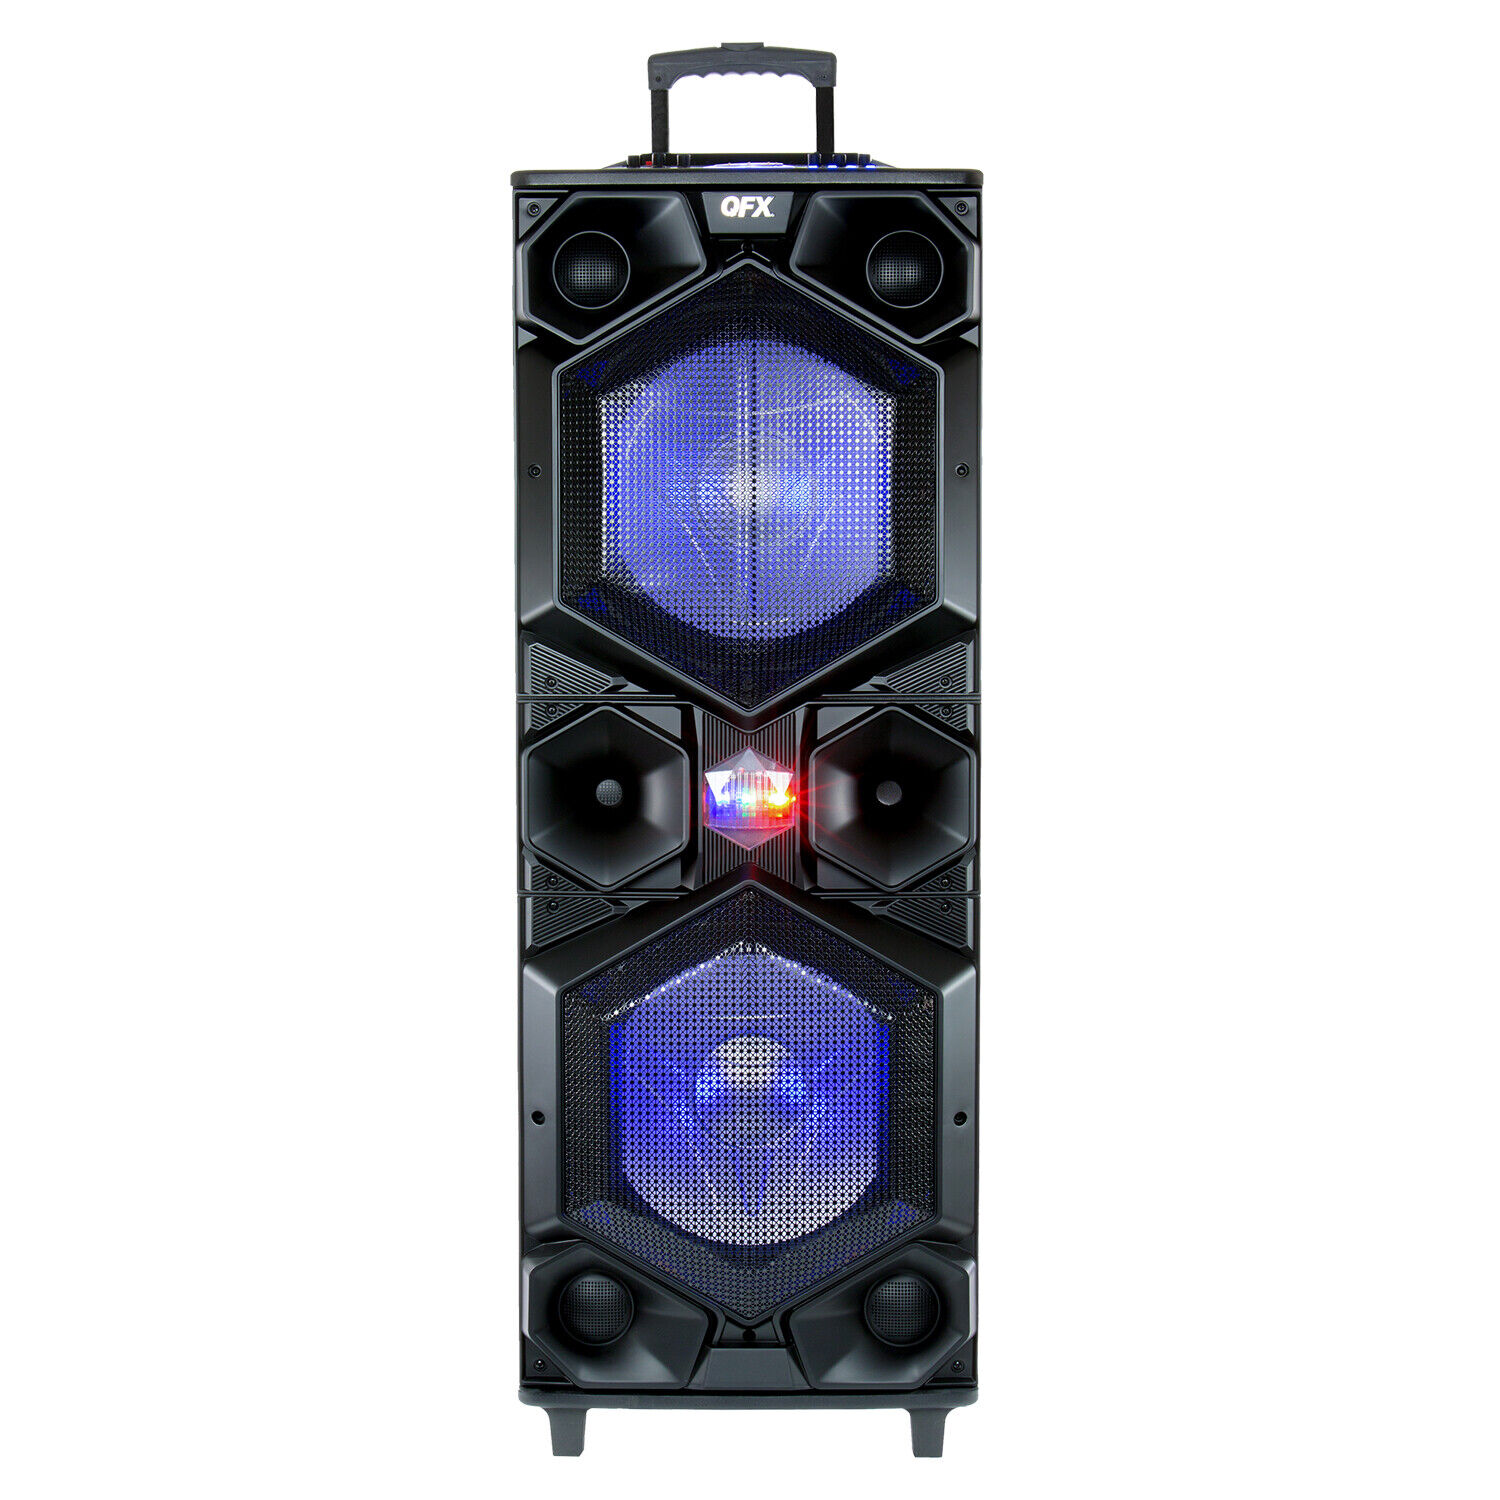 Qfx Bluetooth Pa Speaker W/ Led Party Lights And Mic Inputs (for Parts)